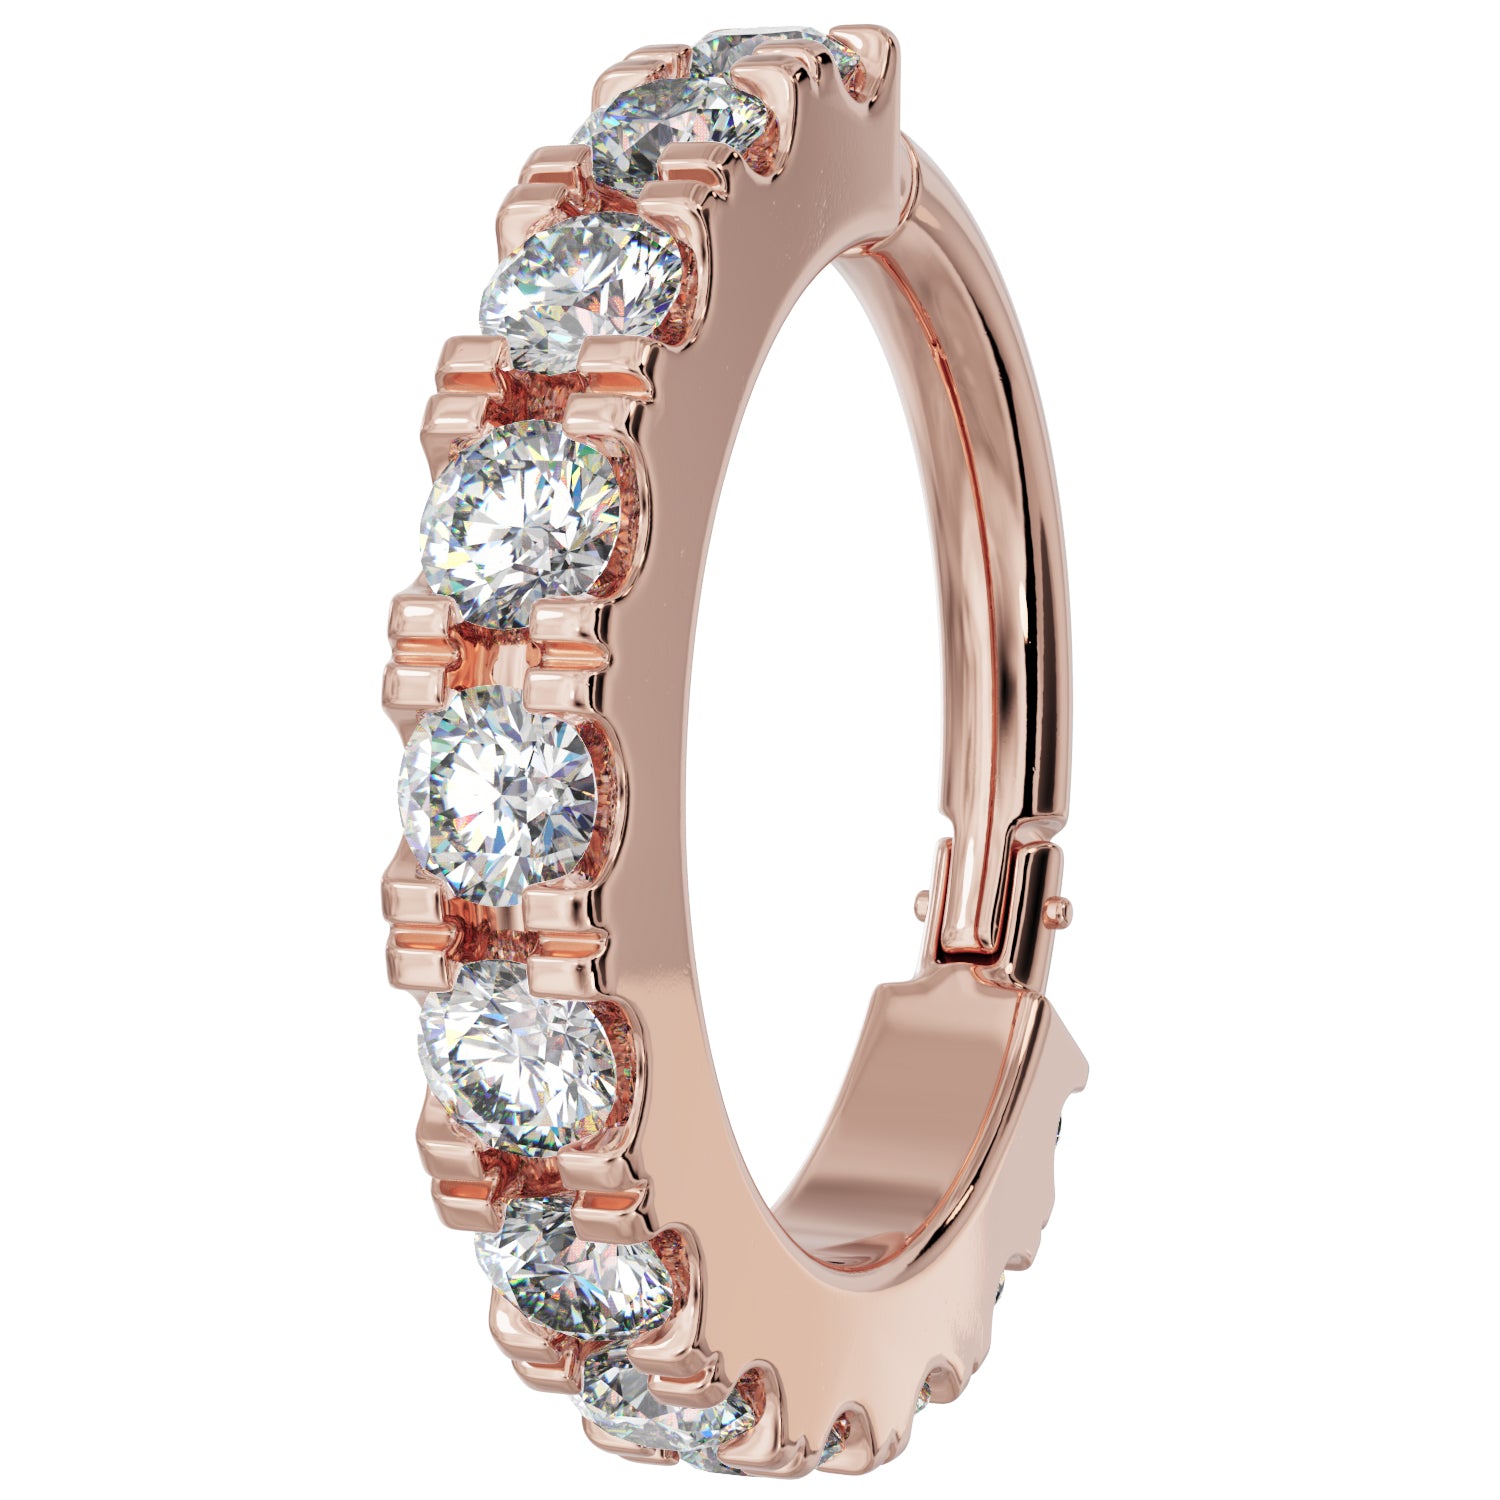 Cubic Zirconia Infinity Cartilage Earring 14k Gold Clicker Ring-14K Rose Gold   16G (1.2mm)   3 8